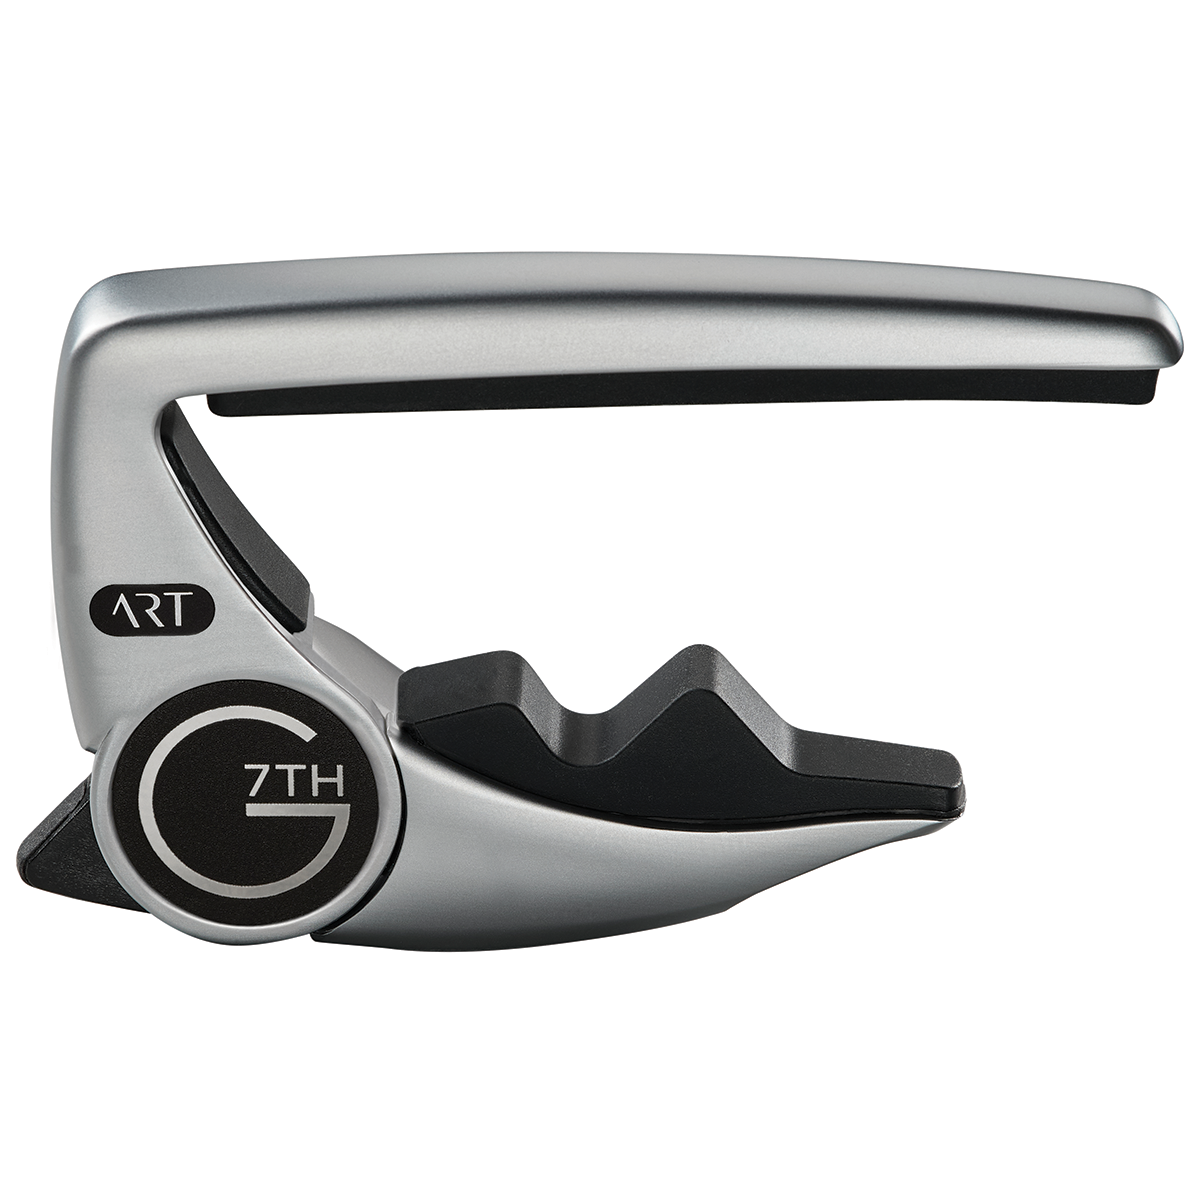 G7th Performance 3 Capo - Classical and Wide Necked, Silver